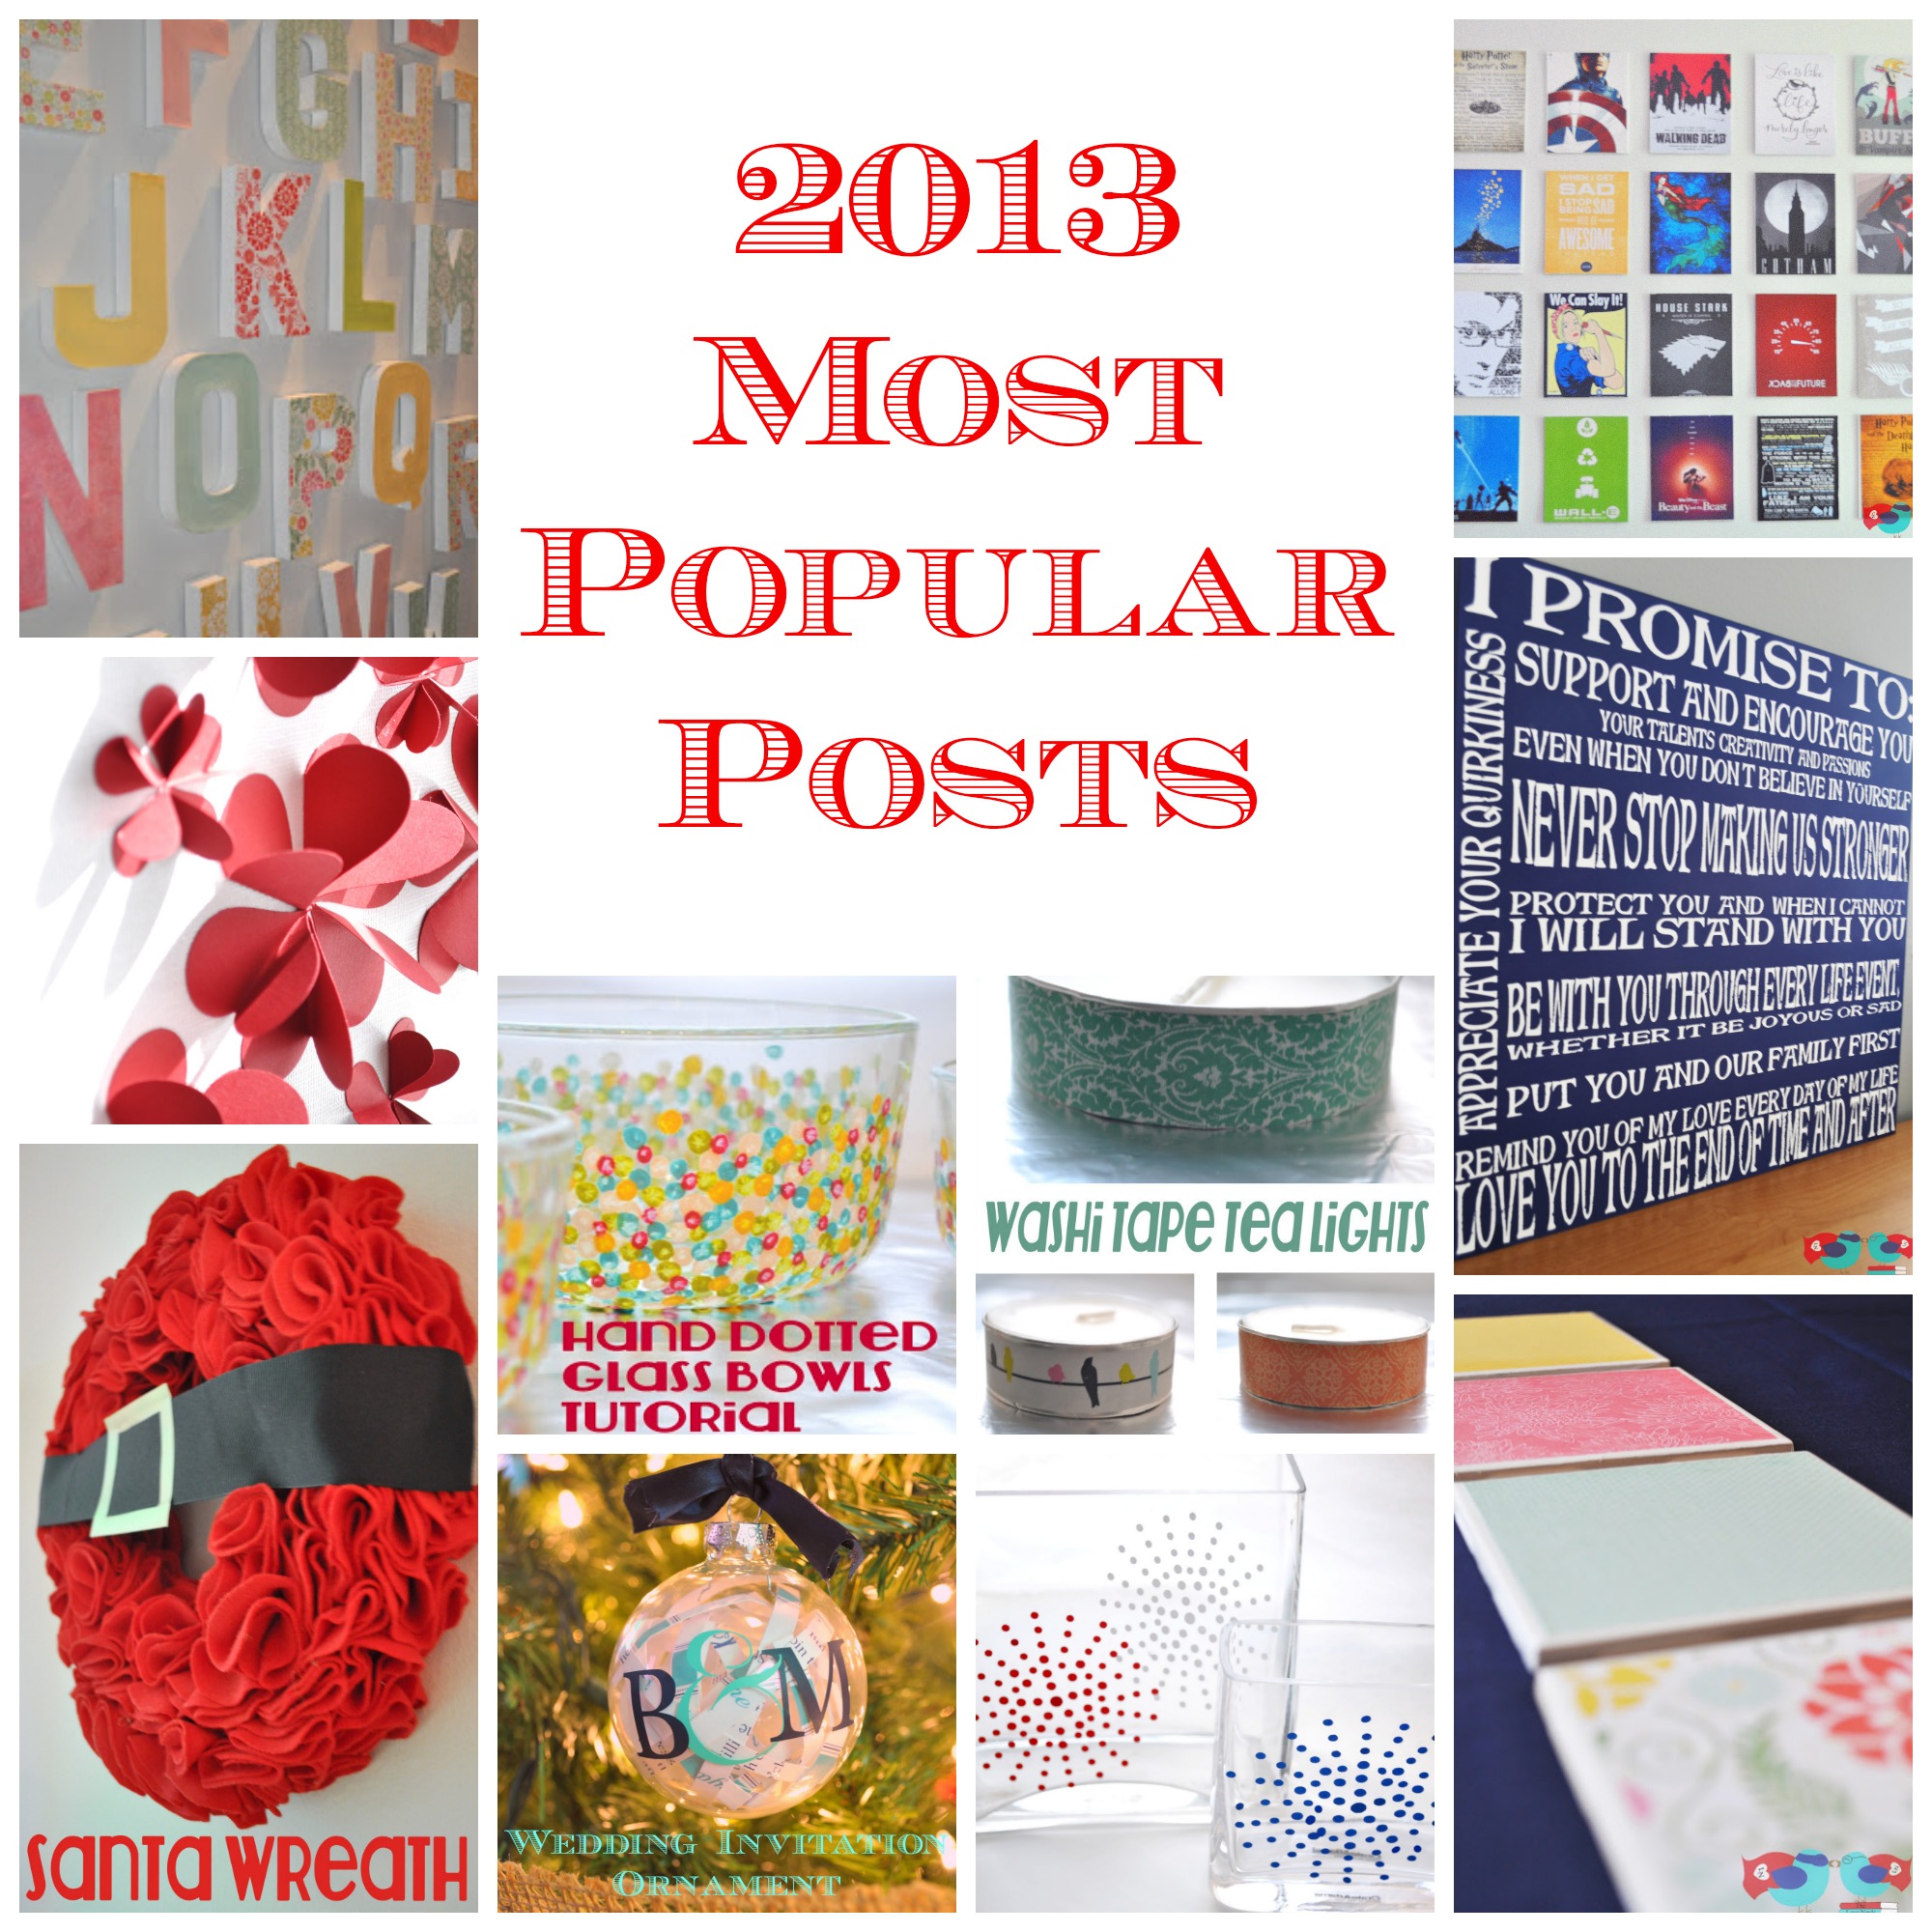 2013 most popular posts from The Love Nerds